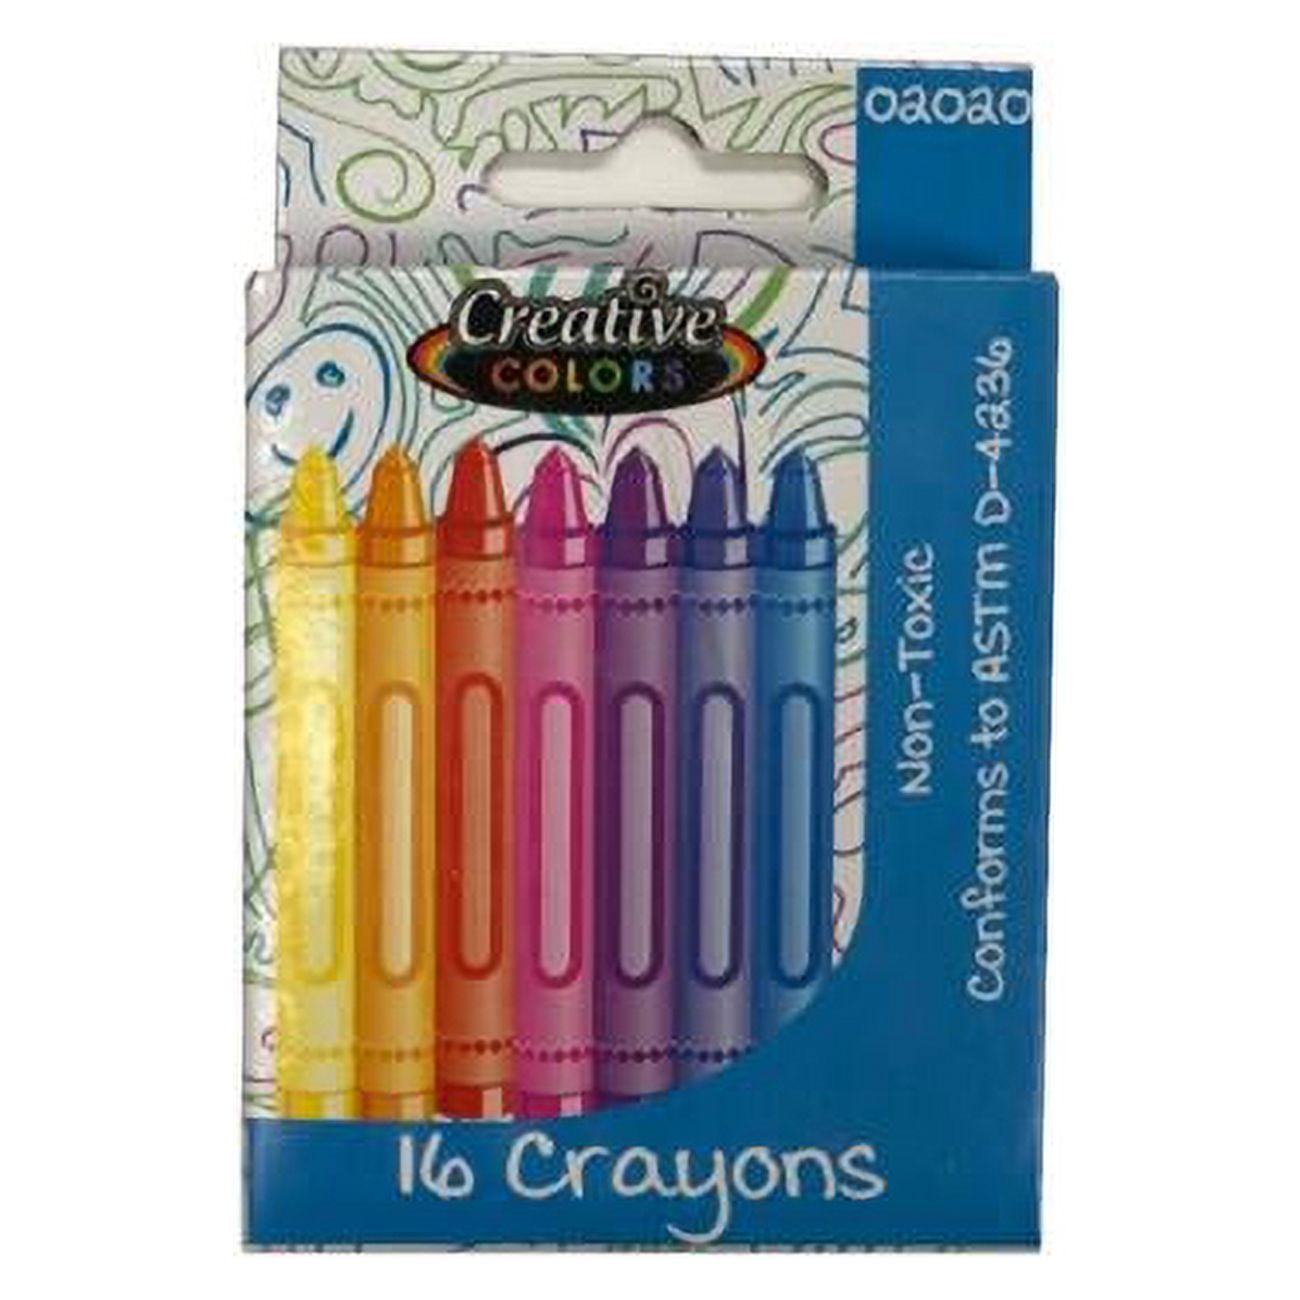 2289533 Assortedcolor Crayons - 16-count & Case Of 192